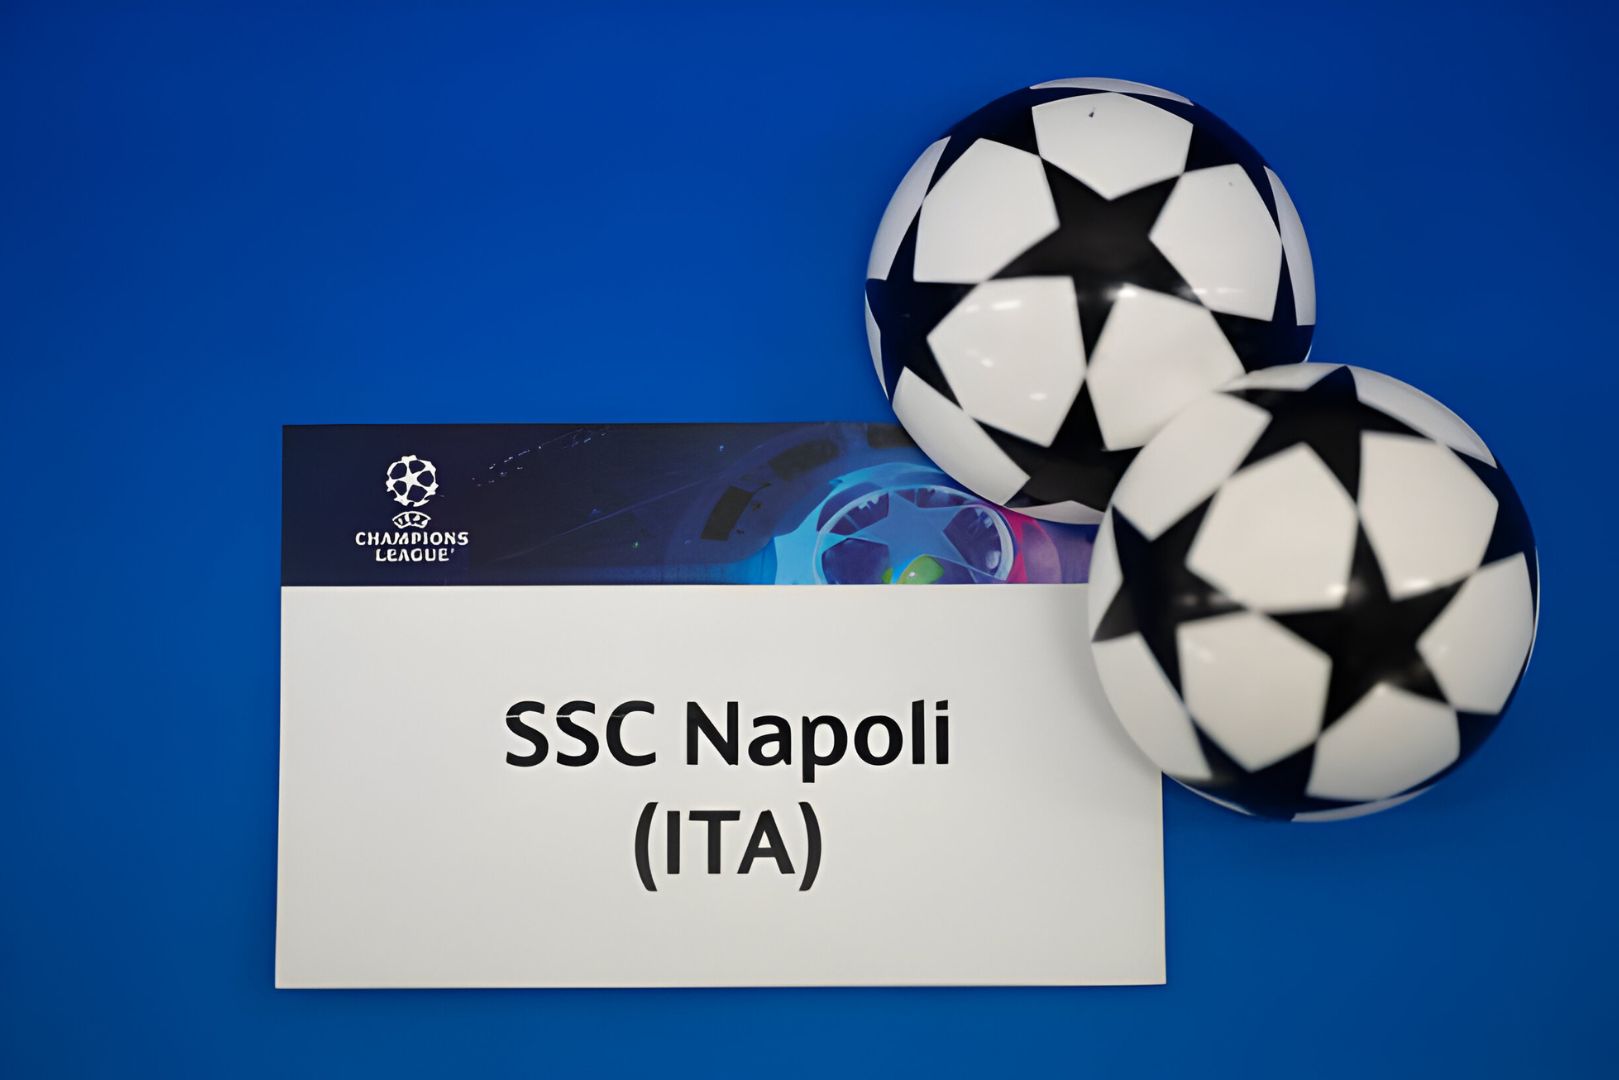 NYON, SWITZERLAND - DECEMBER 18: The card of SSC Napoli is seen prior to the UEFA Champions League 2023/24 Round of 16 Draw at the UEFA Headquarters, the House of European Football, on December 18, 2023 in Nyon, Switzerland.